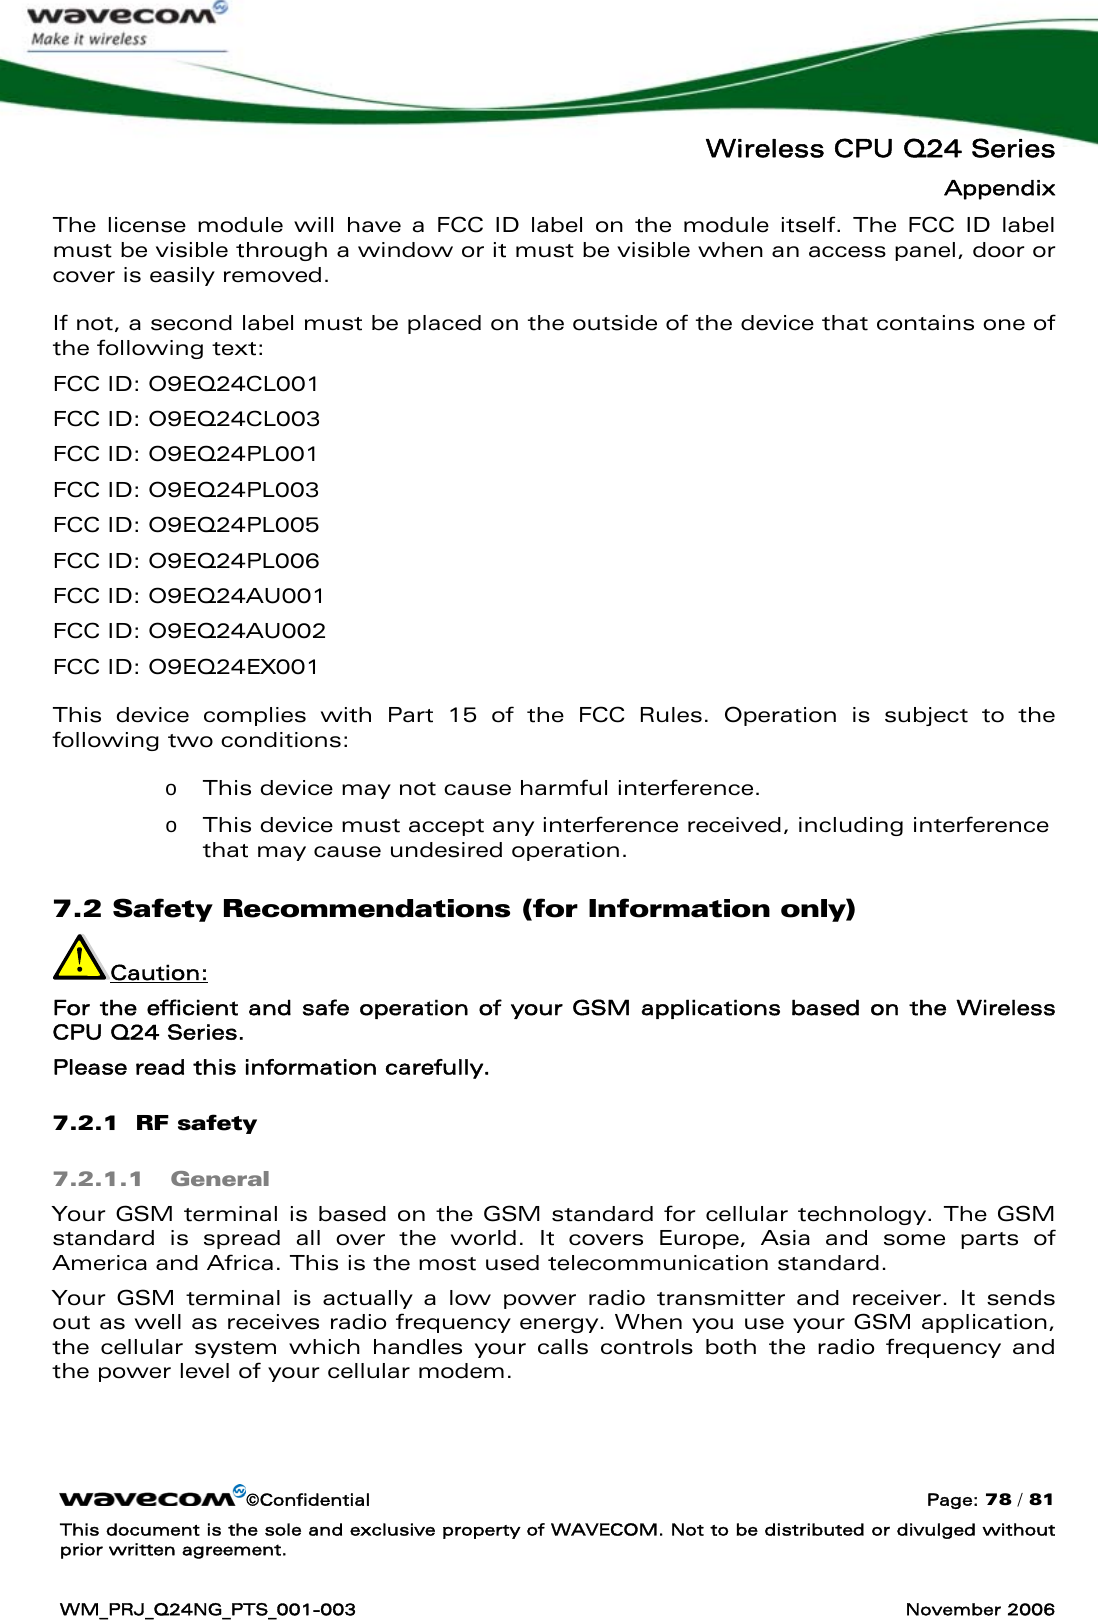   Wireless CPU Q24 Series Appendix ©Confidential  Page: 78 / 81 This document is the sole and exclusive property of WAVECOM. Not to be distributed or divulged without prior written agreement.  WM_PRJ_Q24NG_PTS_001-003  November 2006  The license module will have a FCC ID label on the module itself. The FCC ID label must be visible through a window or it must be visible when an access panel, door or cover is easily removed.   If not, a second label must be placed on the outside of the device that contains one of the following text:  FCC ID: O9EQ24CL001 FCC ID: O9EQ24CL003  FCC ID: O9EQ24PL001  FCC ID: O9EQ24PL003  FCC ID: O9EQ24PL005  FCC ID: O9EQ24PL006  FCC ID: O9EQ24AU001  FCC ID: O9EQ24AU002  FCC ID: O9EQ24EX001  This device complies with Part 15 of the FCC Rules. Operation is subject to the following two conditions:  o This device may not cause harmful interference. o This device must accept any interference received, including interference that may cause undesired operation. 7.2 Safety Recommendations (for Information only) Caution:  For the efficient and safe operation of your GSM applications based on the Wireless CPU Q24 Series. Please read this information carefully. 7.2.1  RF safety 7.2.1.1 General Your GSM terminal is based on the GSM standard for cellular technology. The GSM standard is spread all over the world. It covers Europe, Asia and some parts of America and Africa. This is the most used telecommunication standard. Your GSM terminal is actually a low power radio transmitter and receiver. It sends out as well as receives radio frequency energy. When you use your GSM application, the cellular system which handles your calls controls both the radio frequency and the power level of your cellular modem. 